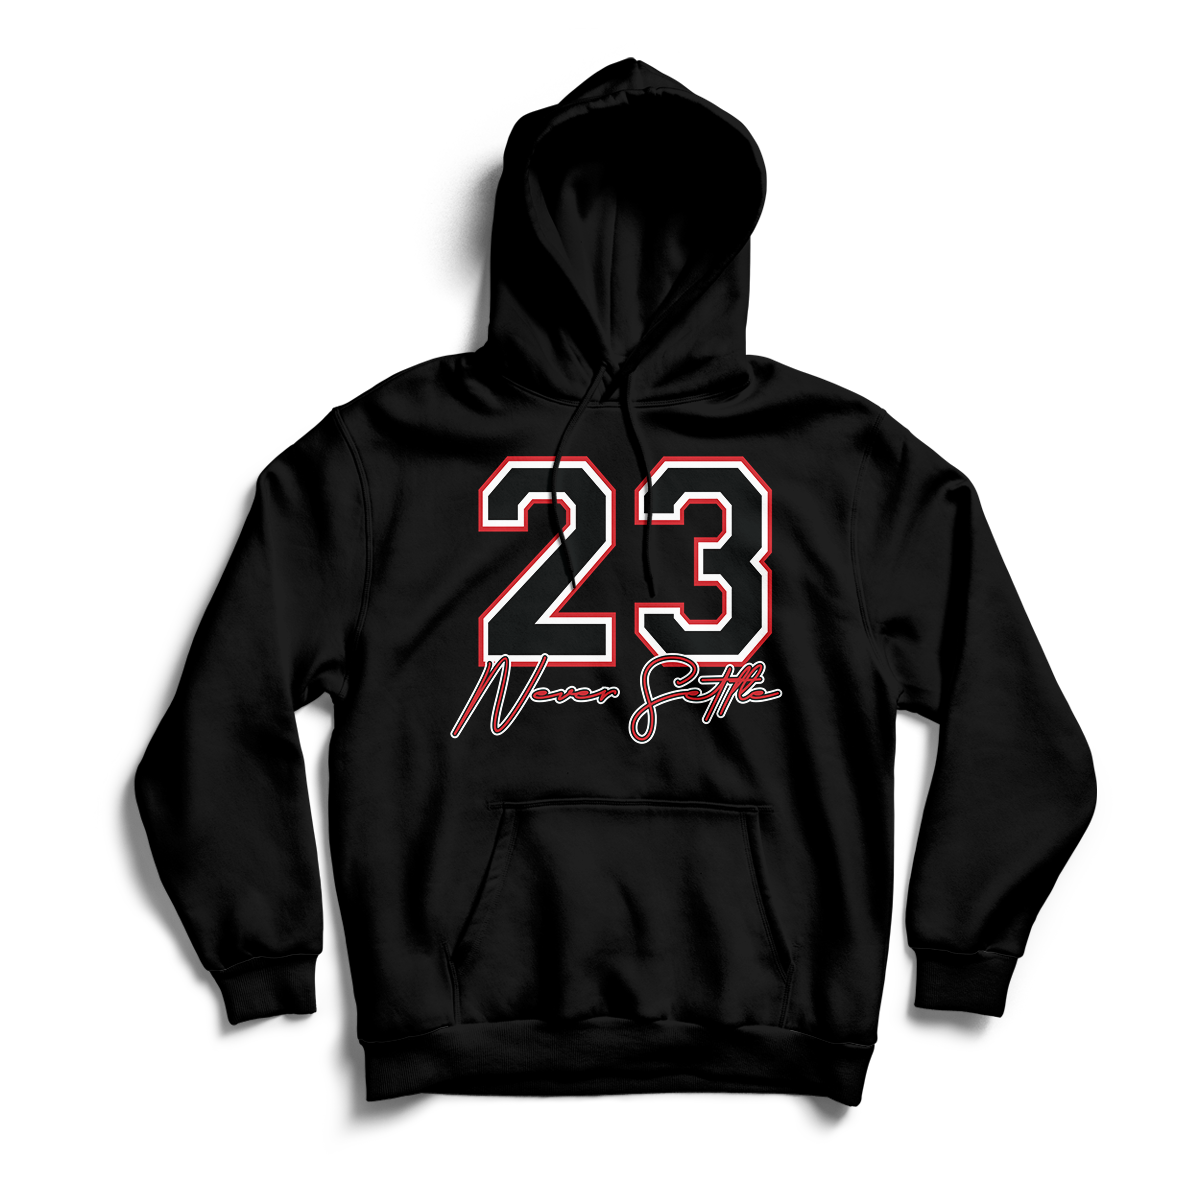 'Never Settle' in Bred 11 Unisex Pullover Hoodie